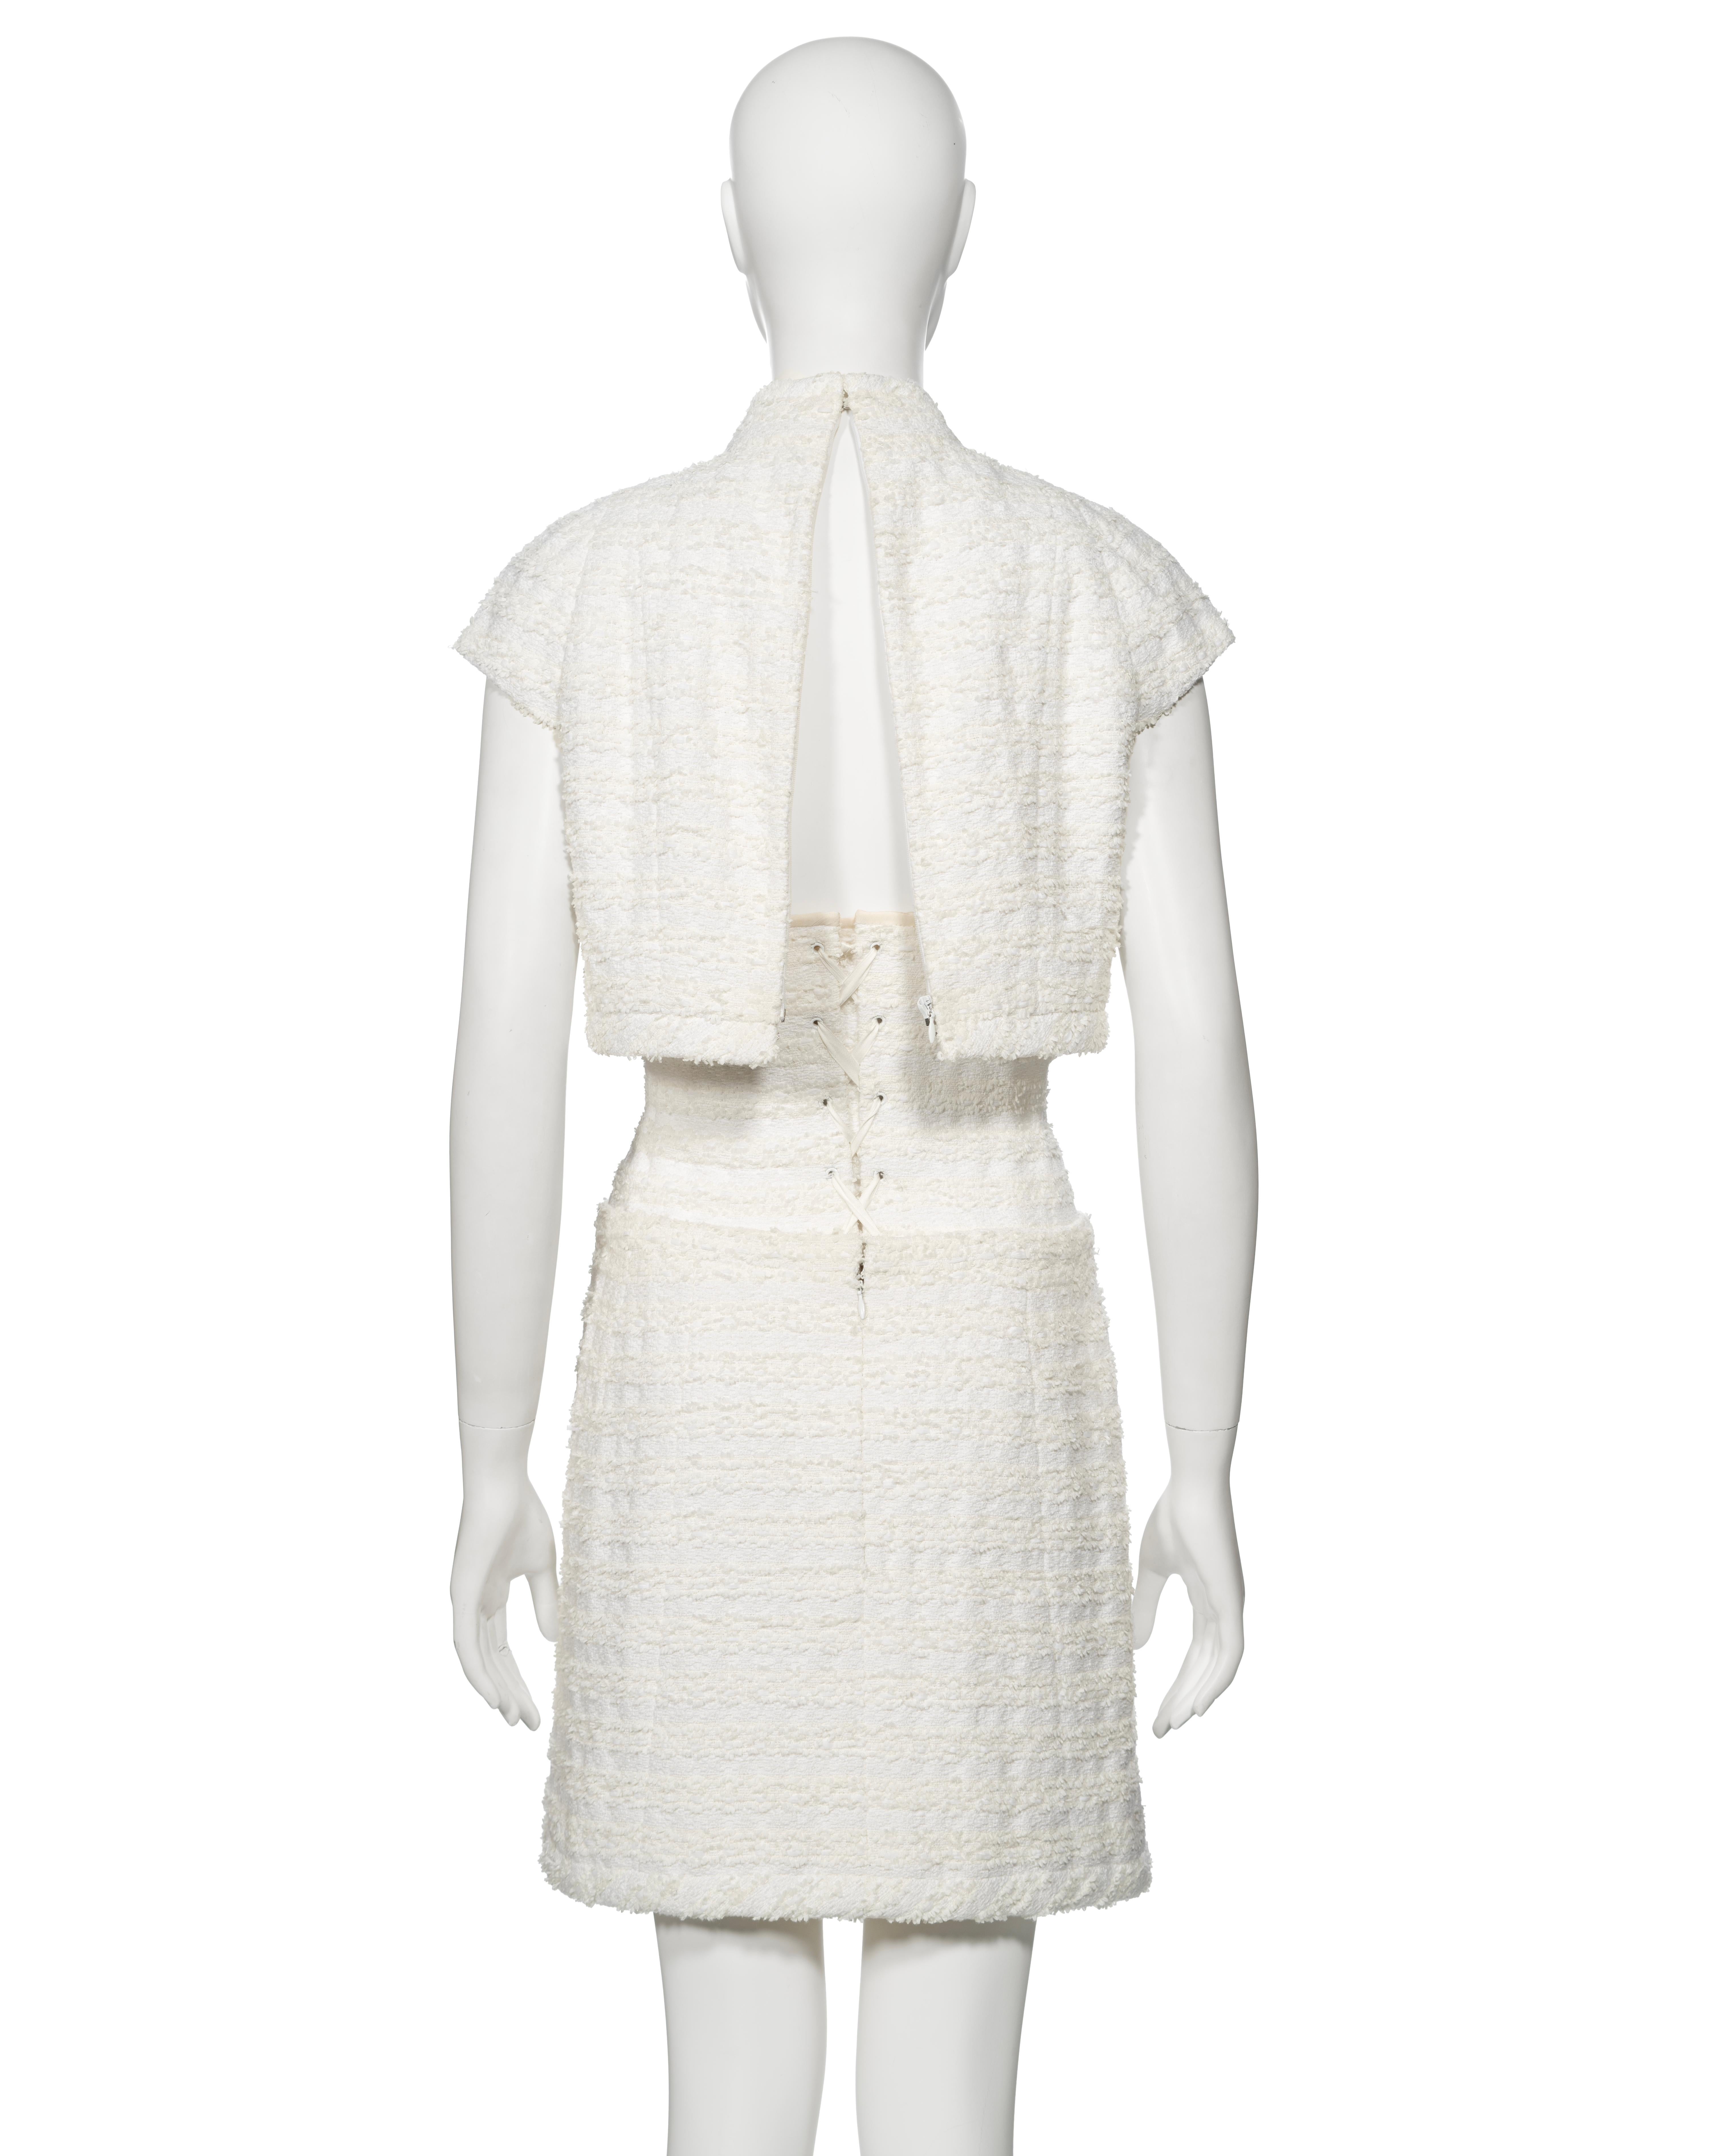 Chanel by Karl Lagerfeld Haute Couture White Bouclé Corseted Skirt Suit, ss 2014 For Sale 12